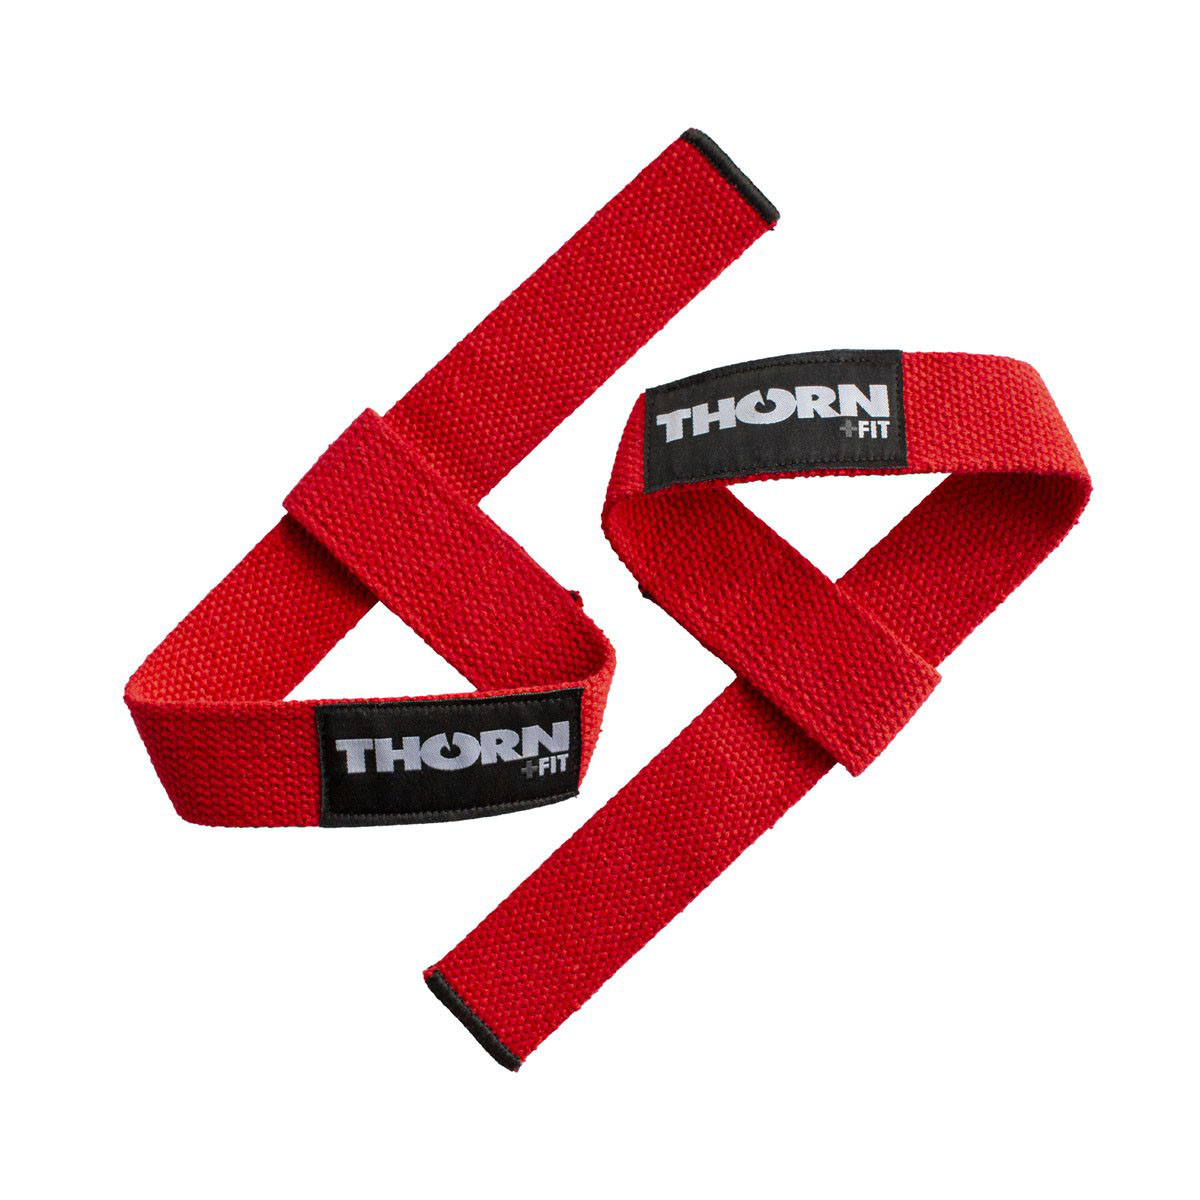 THORN FIT Lifting straps cotton red – Thorn Fit